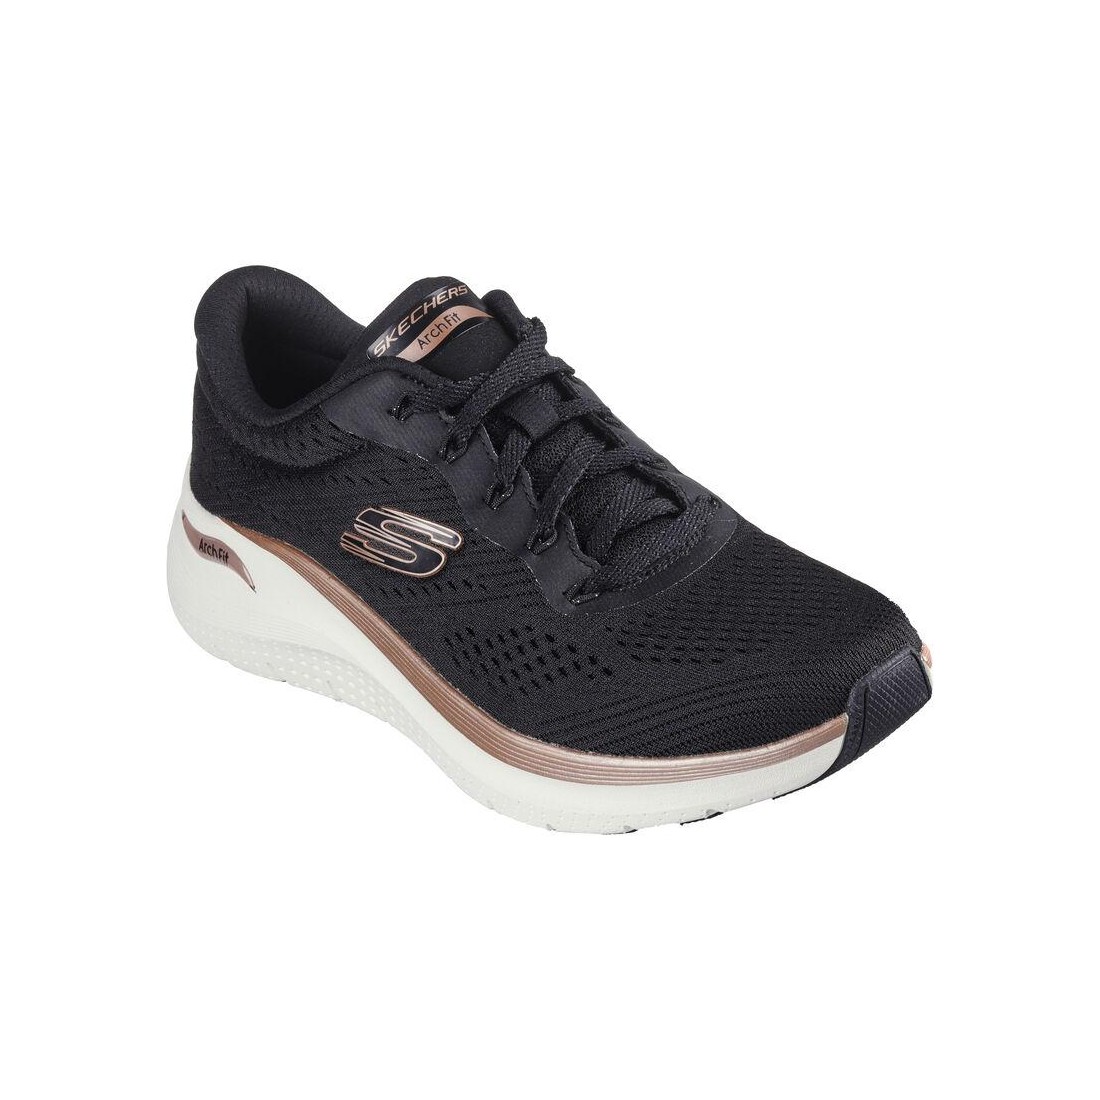 Giày Skechers Arch Fit 2.0 - Glow The Distance Nữ Đen